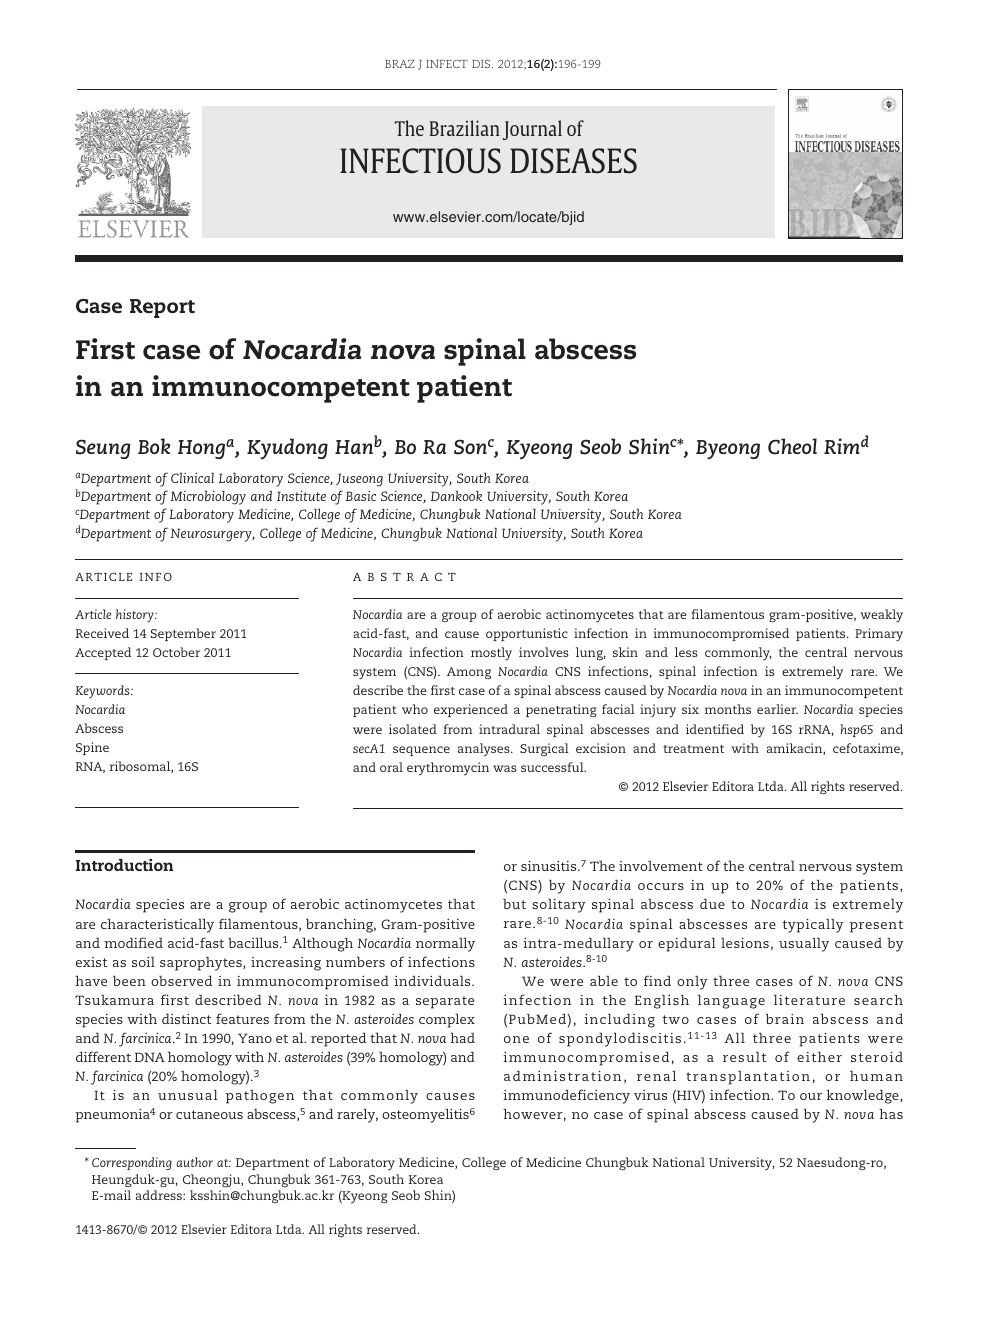 First Case Of Nocardia Nova Spinal Abscess In An Immunocompetent Patient Topic Of Research Paper In Clinical Medicine Download Scholarly Article Pdf And Read For Free On Cyberleninka Open Science Hub